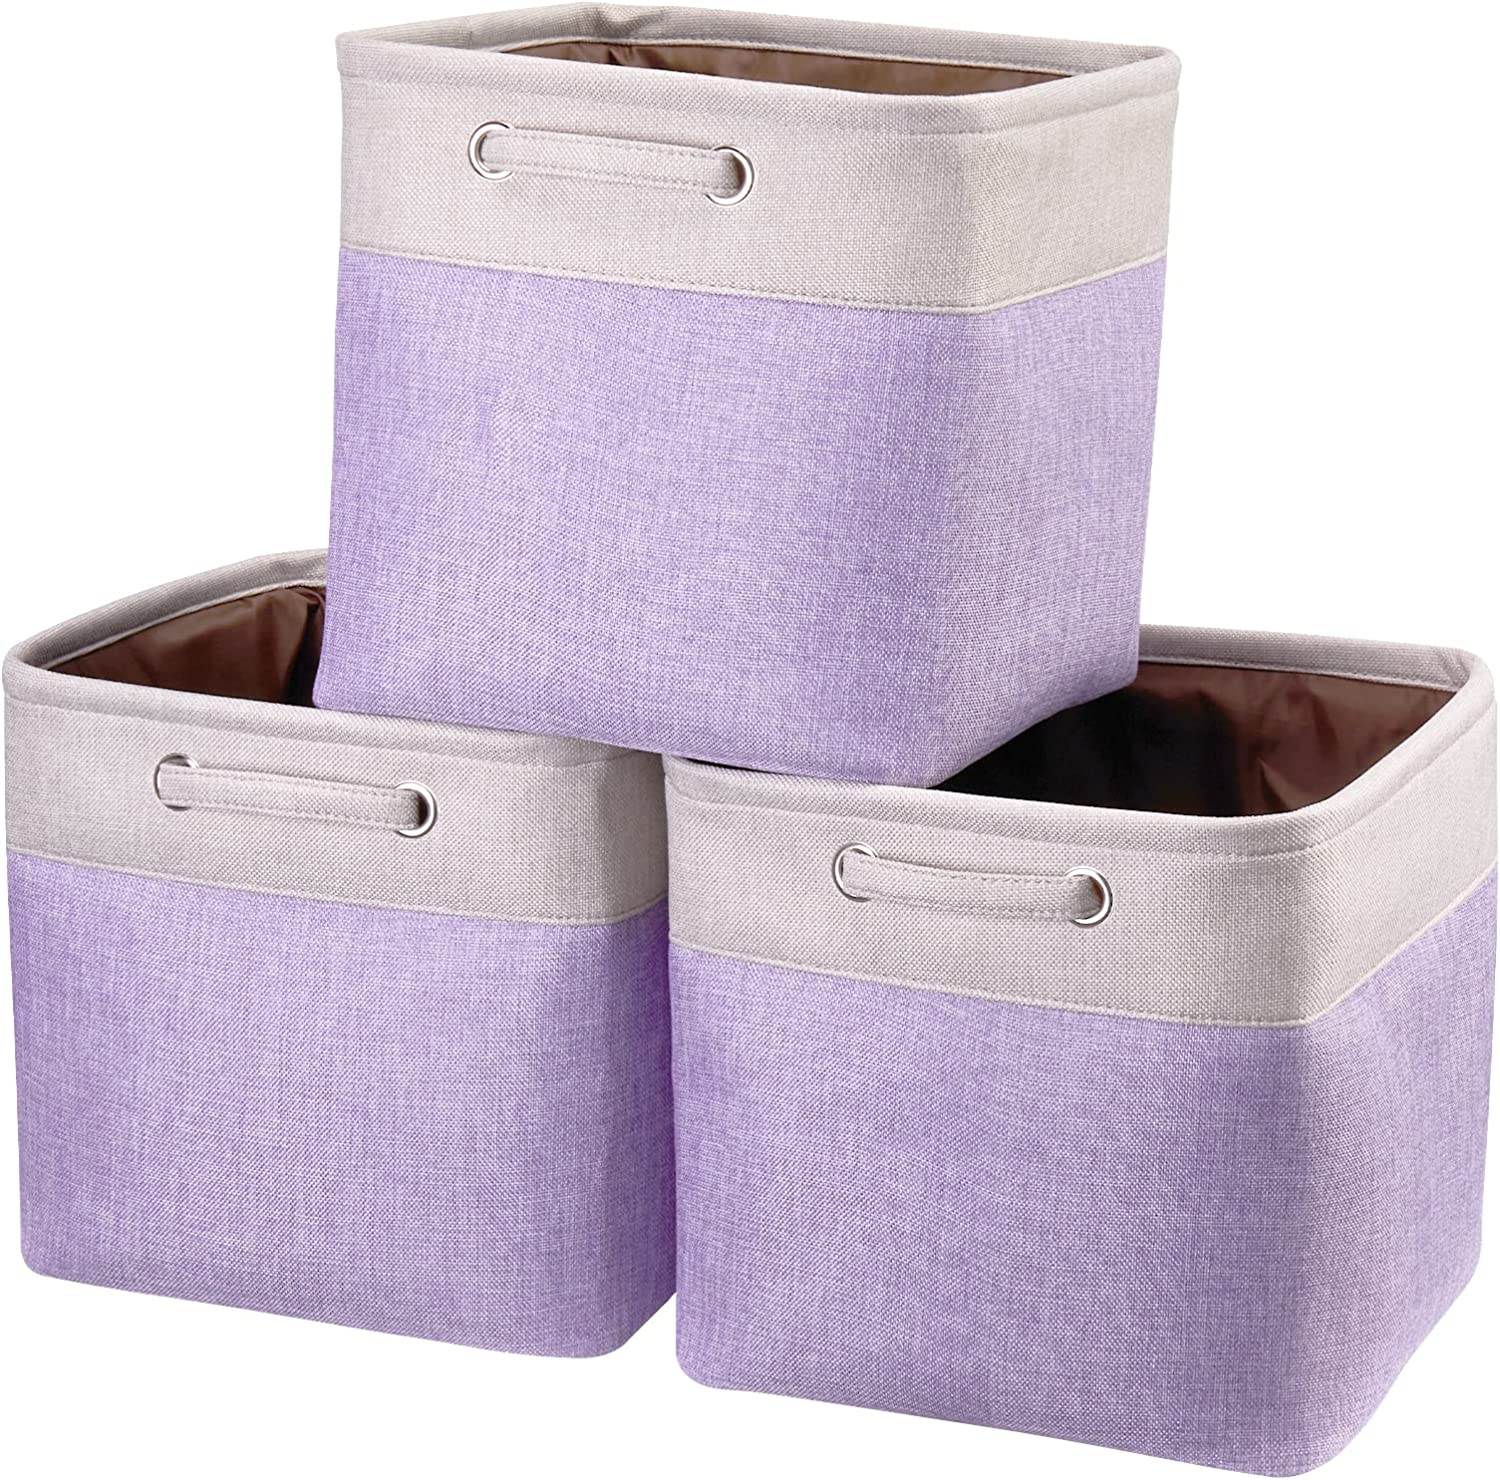 The Best Fabric Storage Cubes For Better Home Organization | Storables